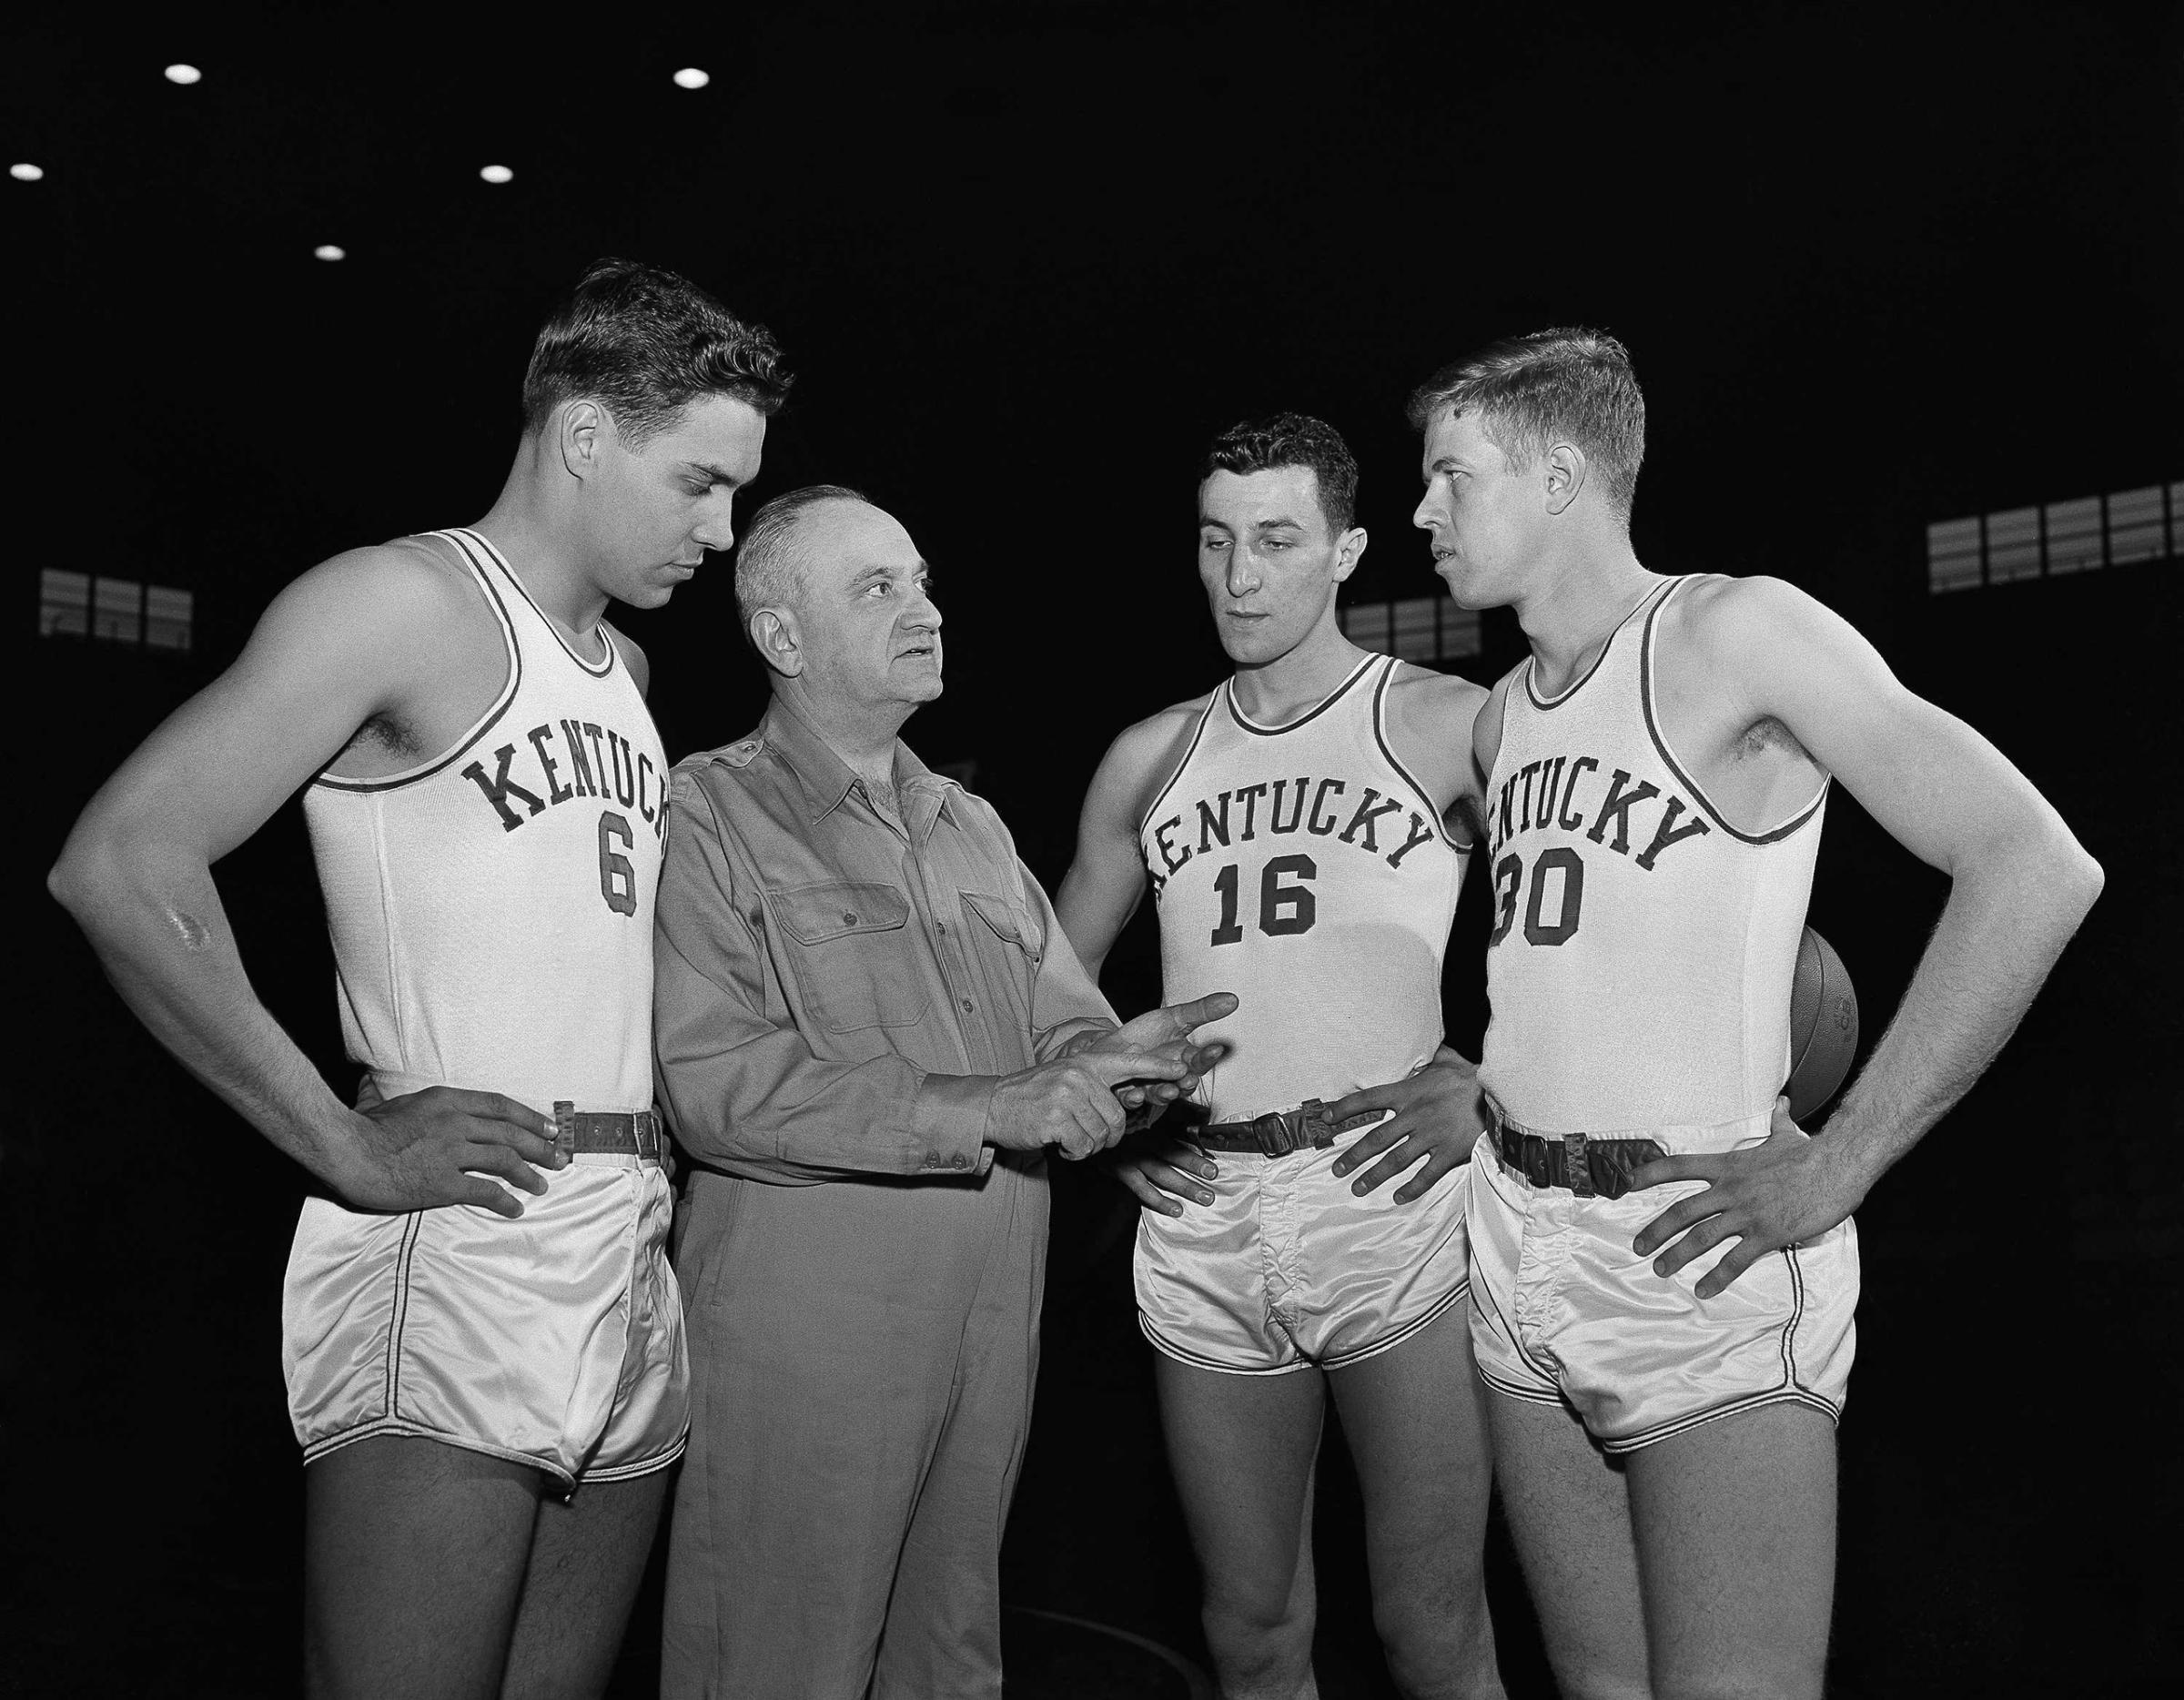 Kentucky basketball coach Adolph Rupp talks to players, from left, Cliff Hagan, Lou Tsioropoulos and Frank Ramsey (30) in Lexington, Ky. Circa 1954.